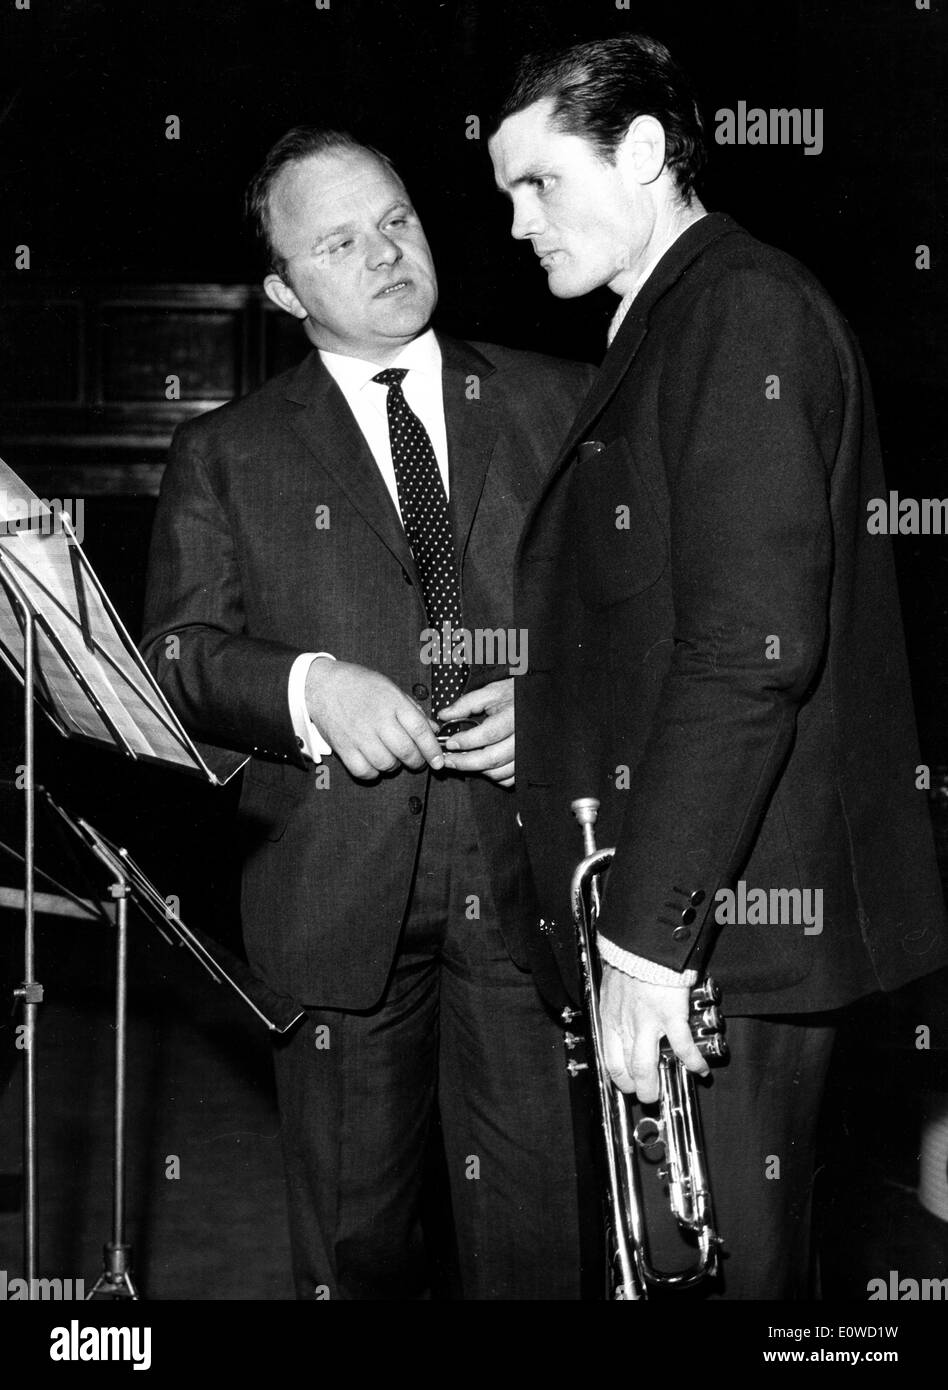 Chet Baker with Werner Mueller after a concert Stock Photo